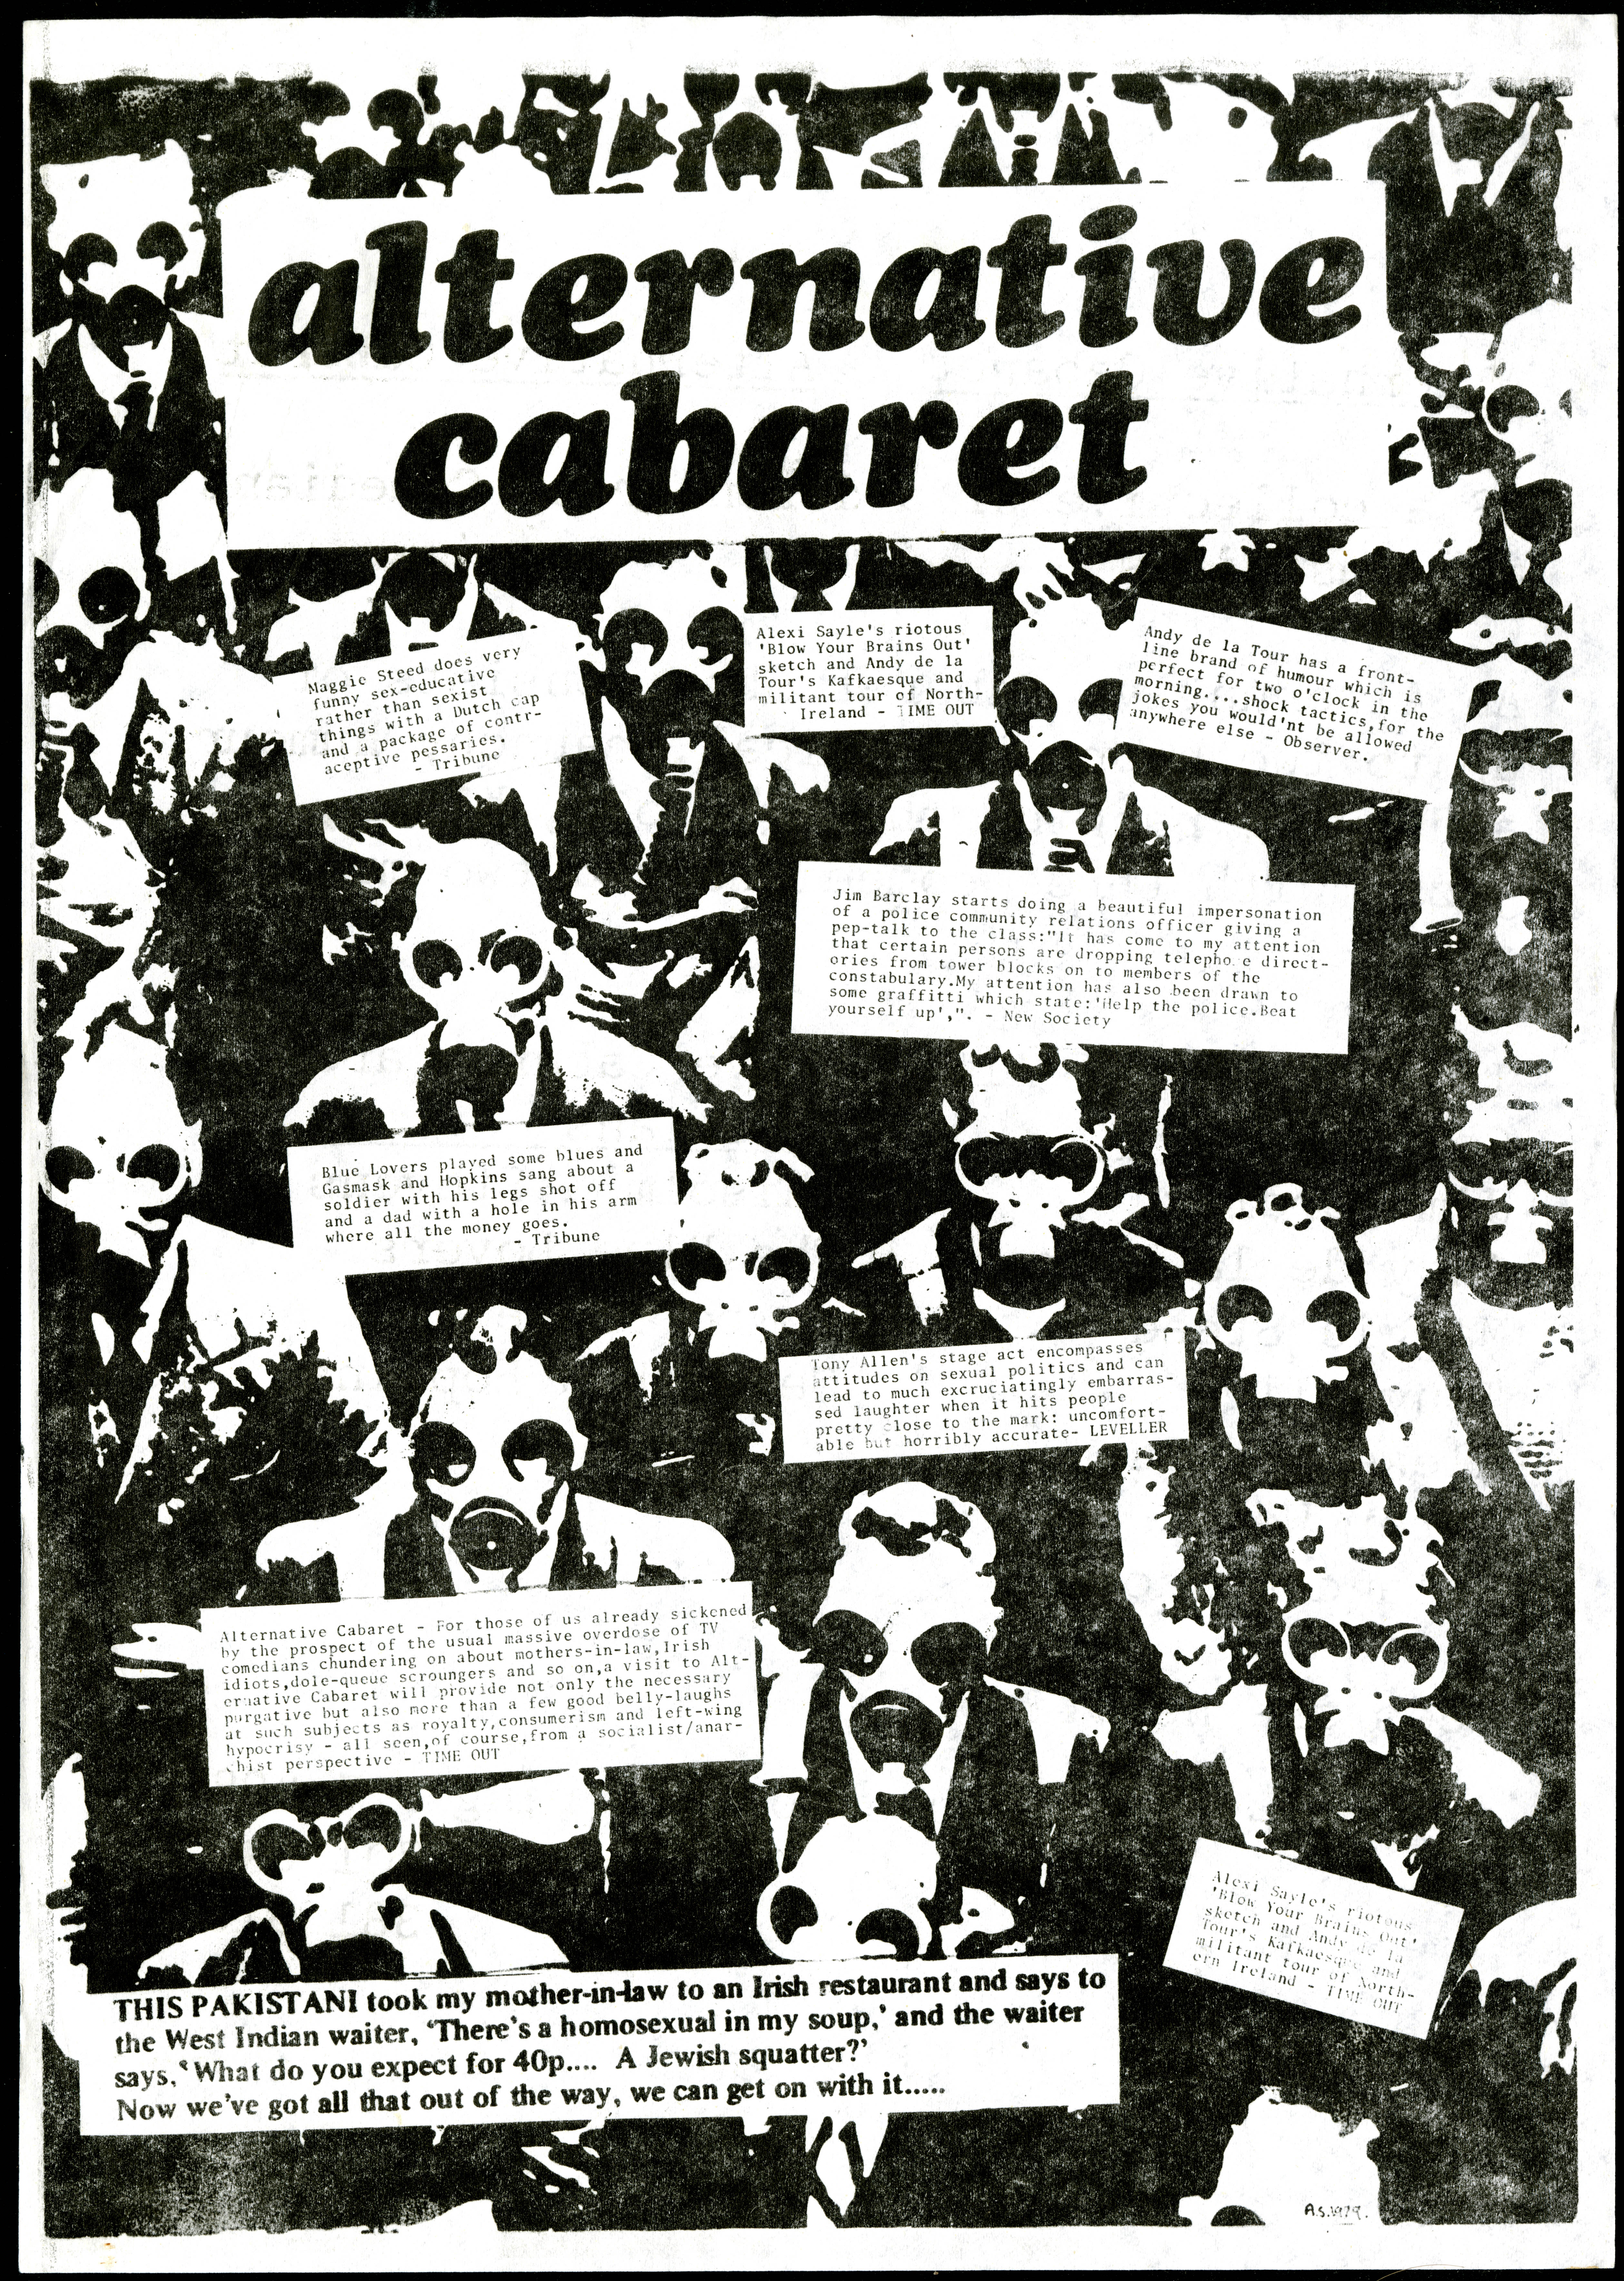 Flyer advertising the Alternative Cabaret collective